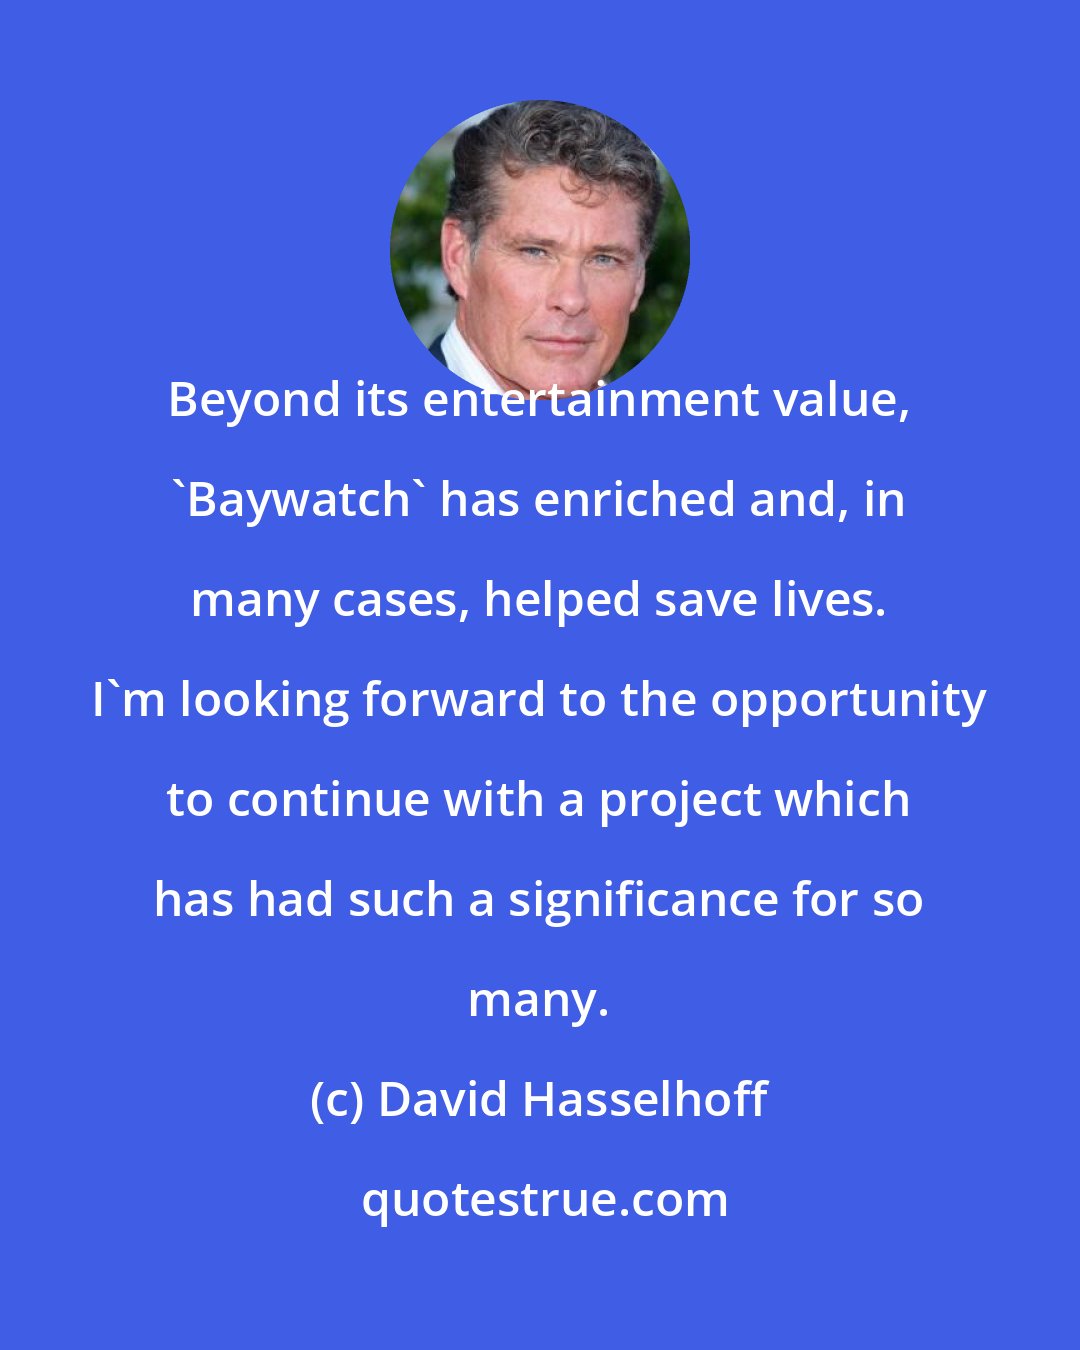 David Hasselhoff: Beyond its entertainment value, 'Baywatch' has enriched and, in many cases, helped save lives. I'm looking forward to the opportunity to continue with a project which has had such a significance for so many.